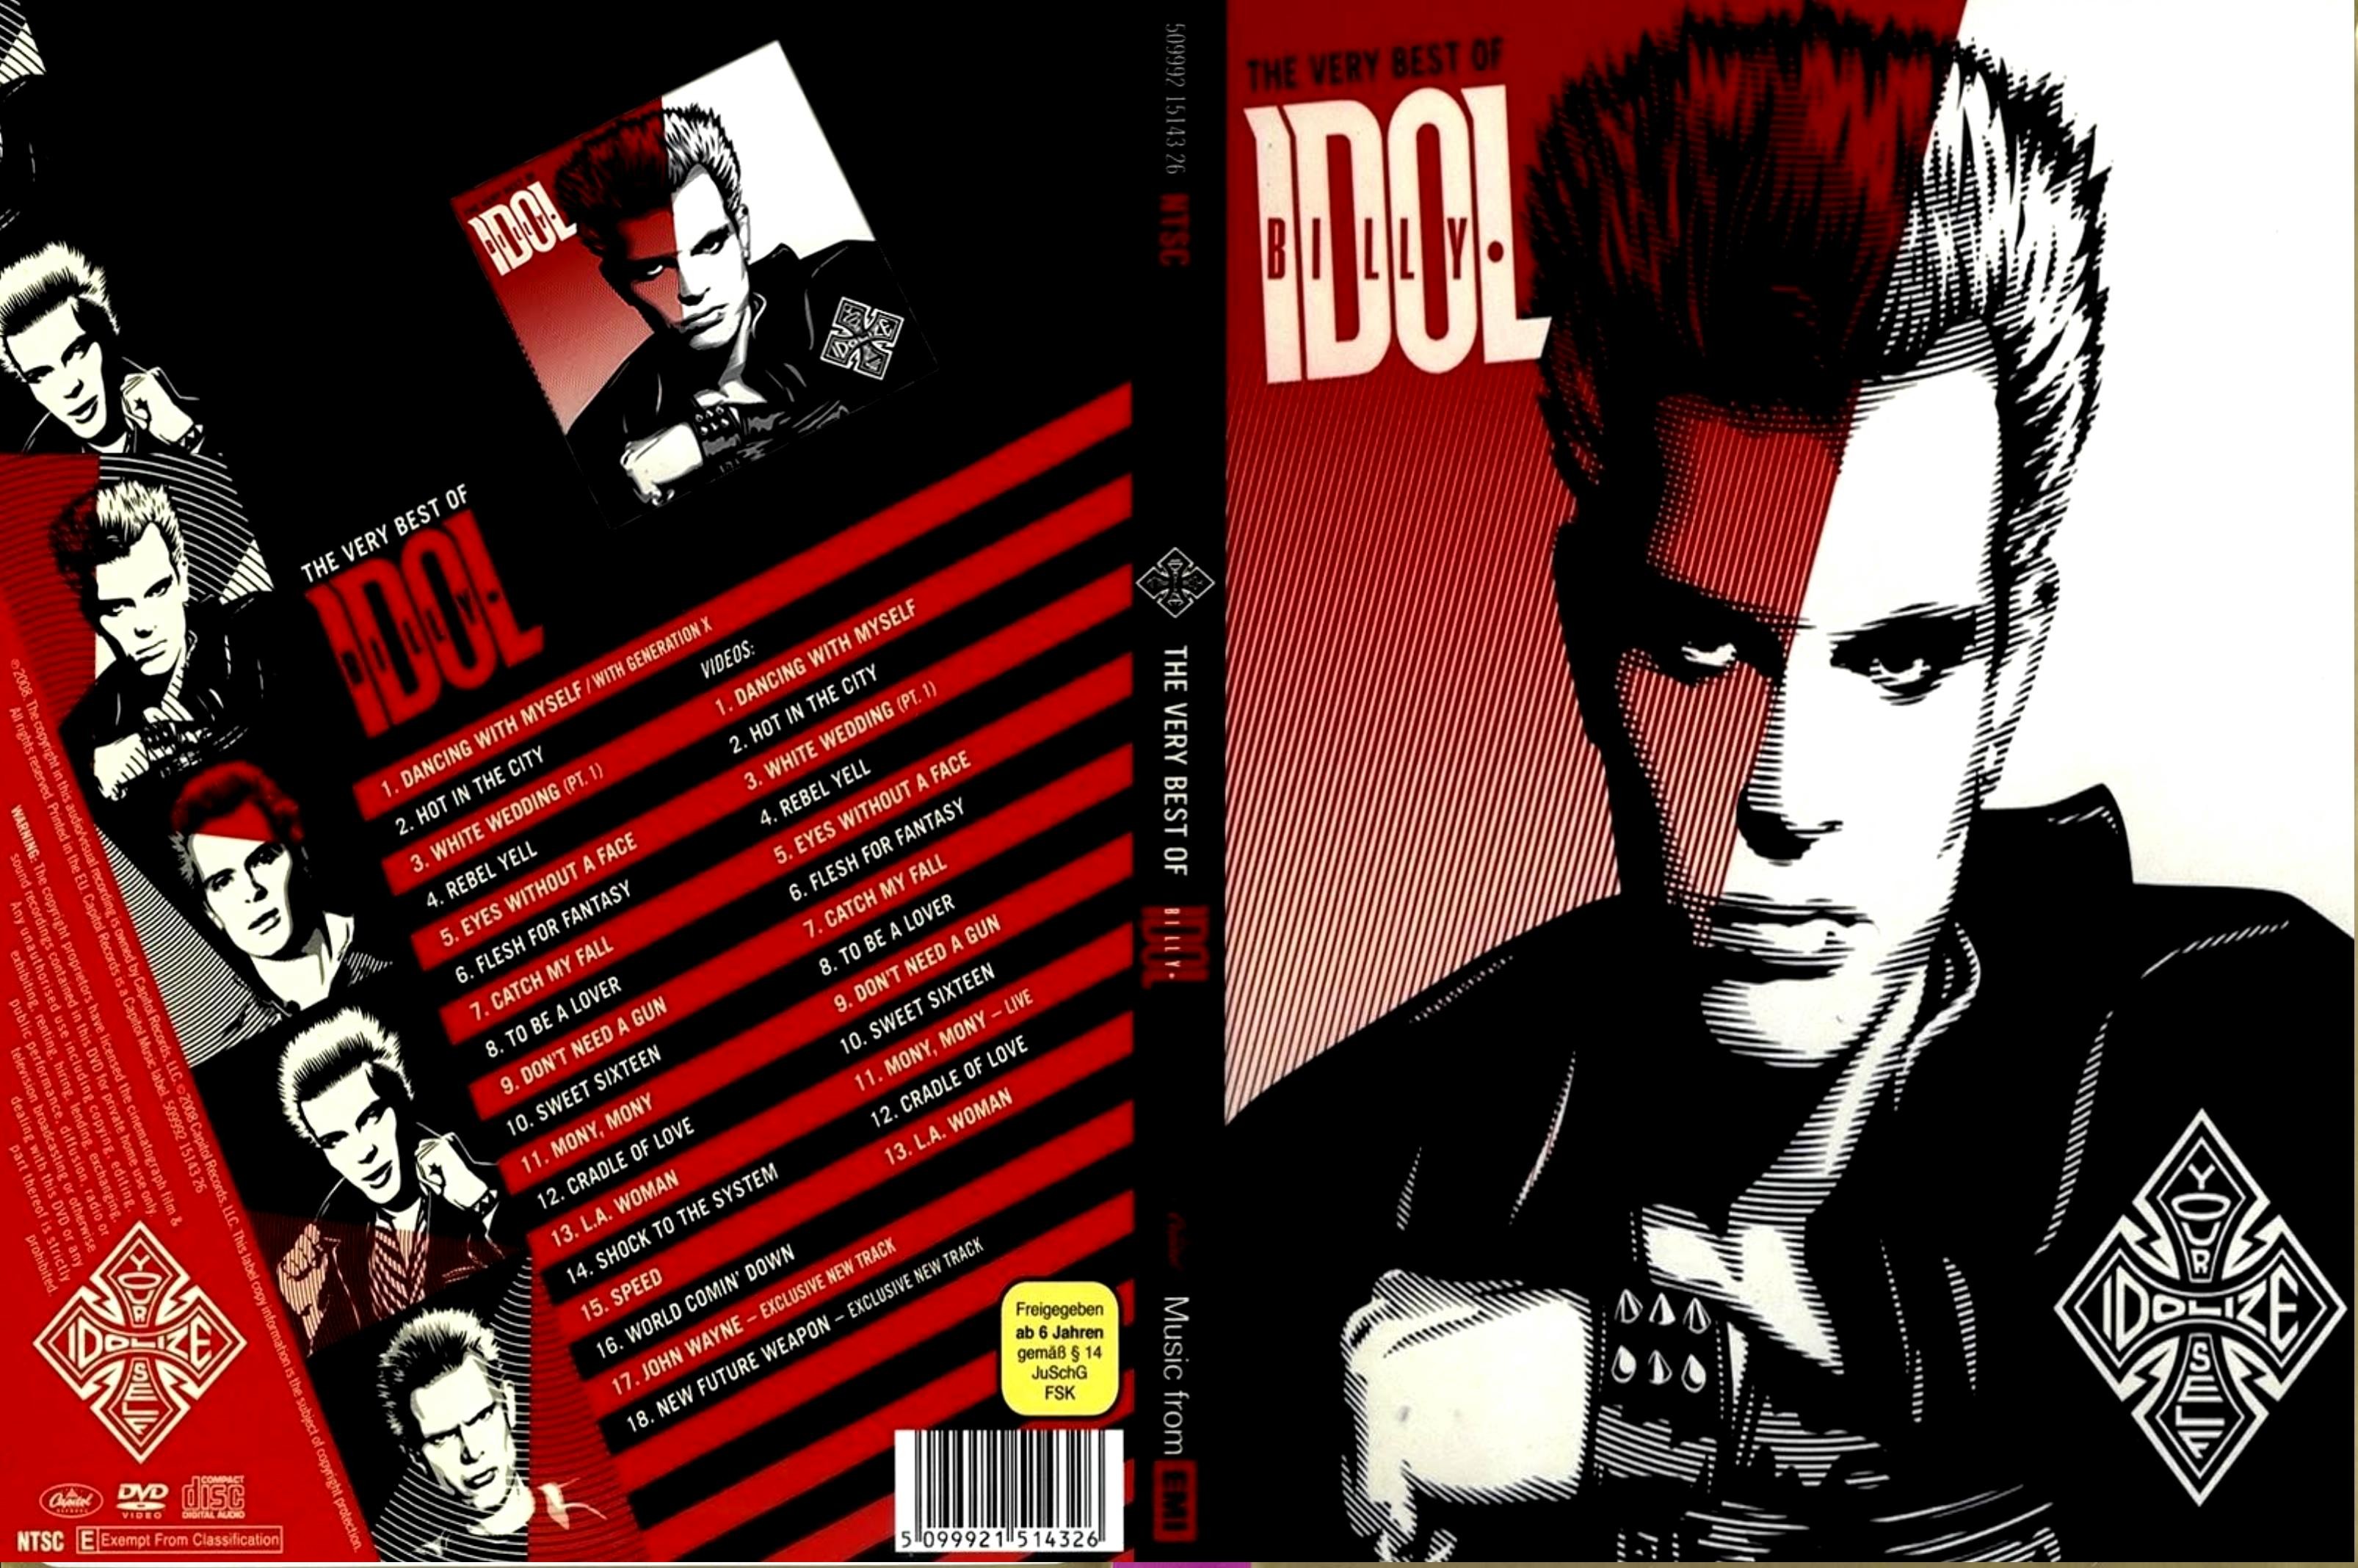 Jaquette DVD Billy Idol The very best of